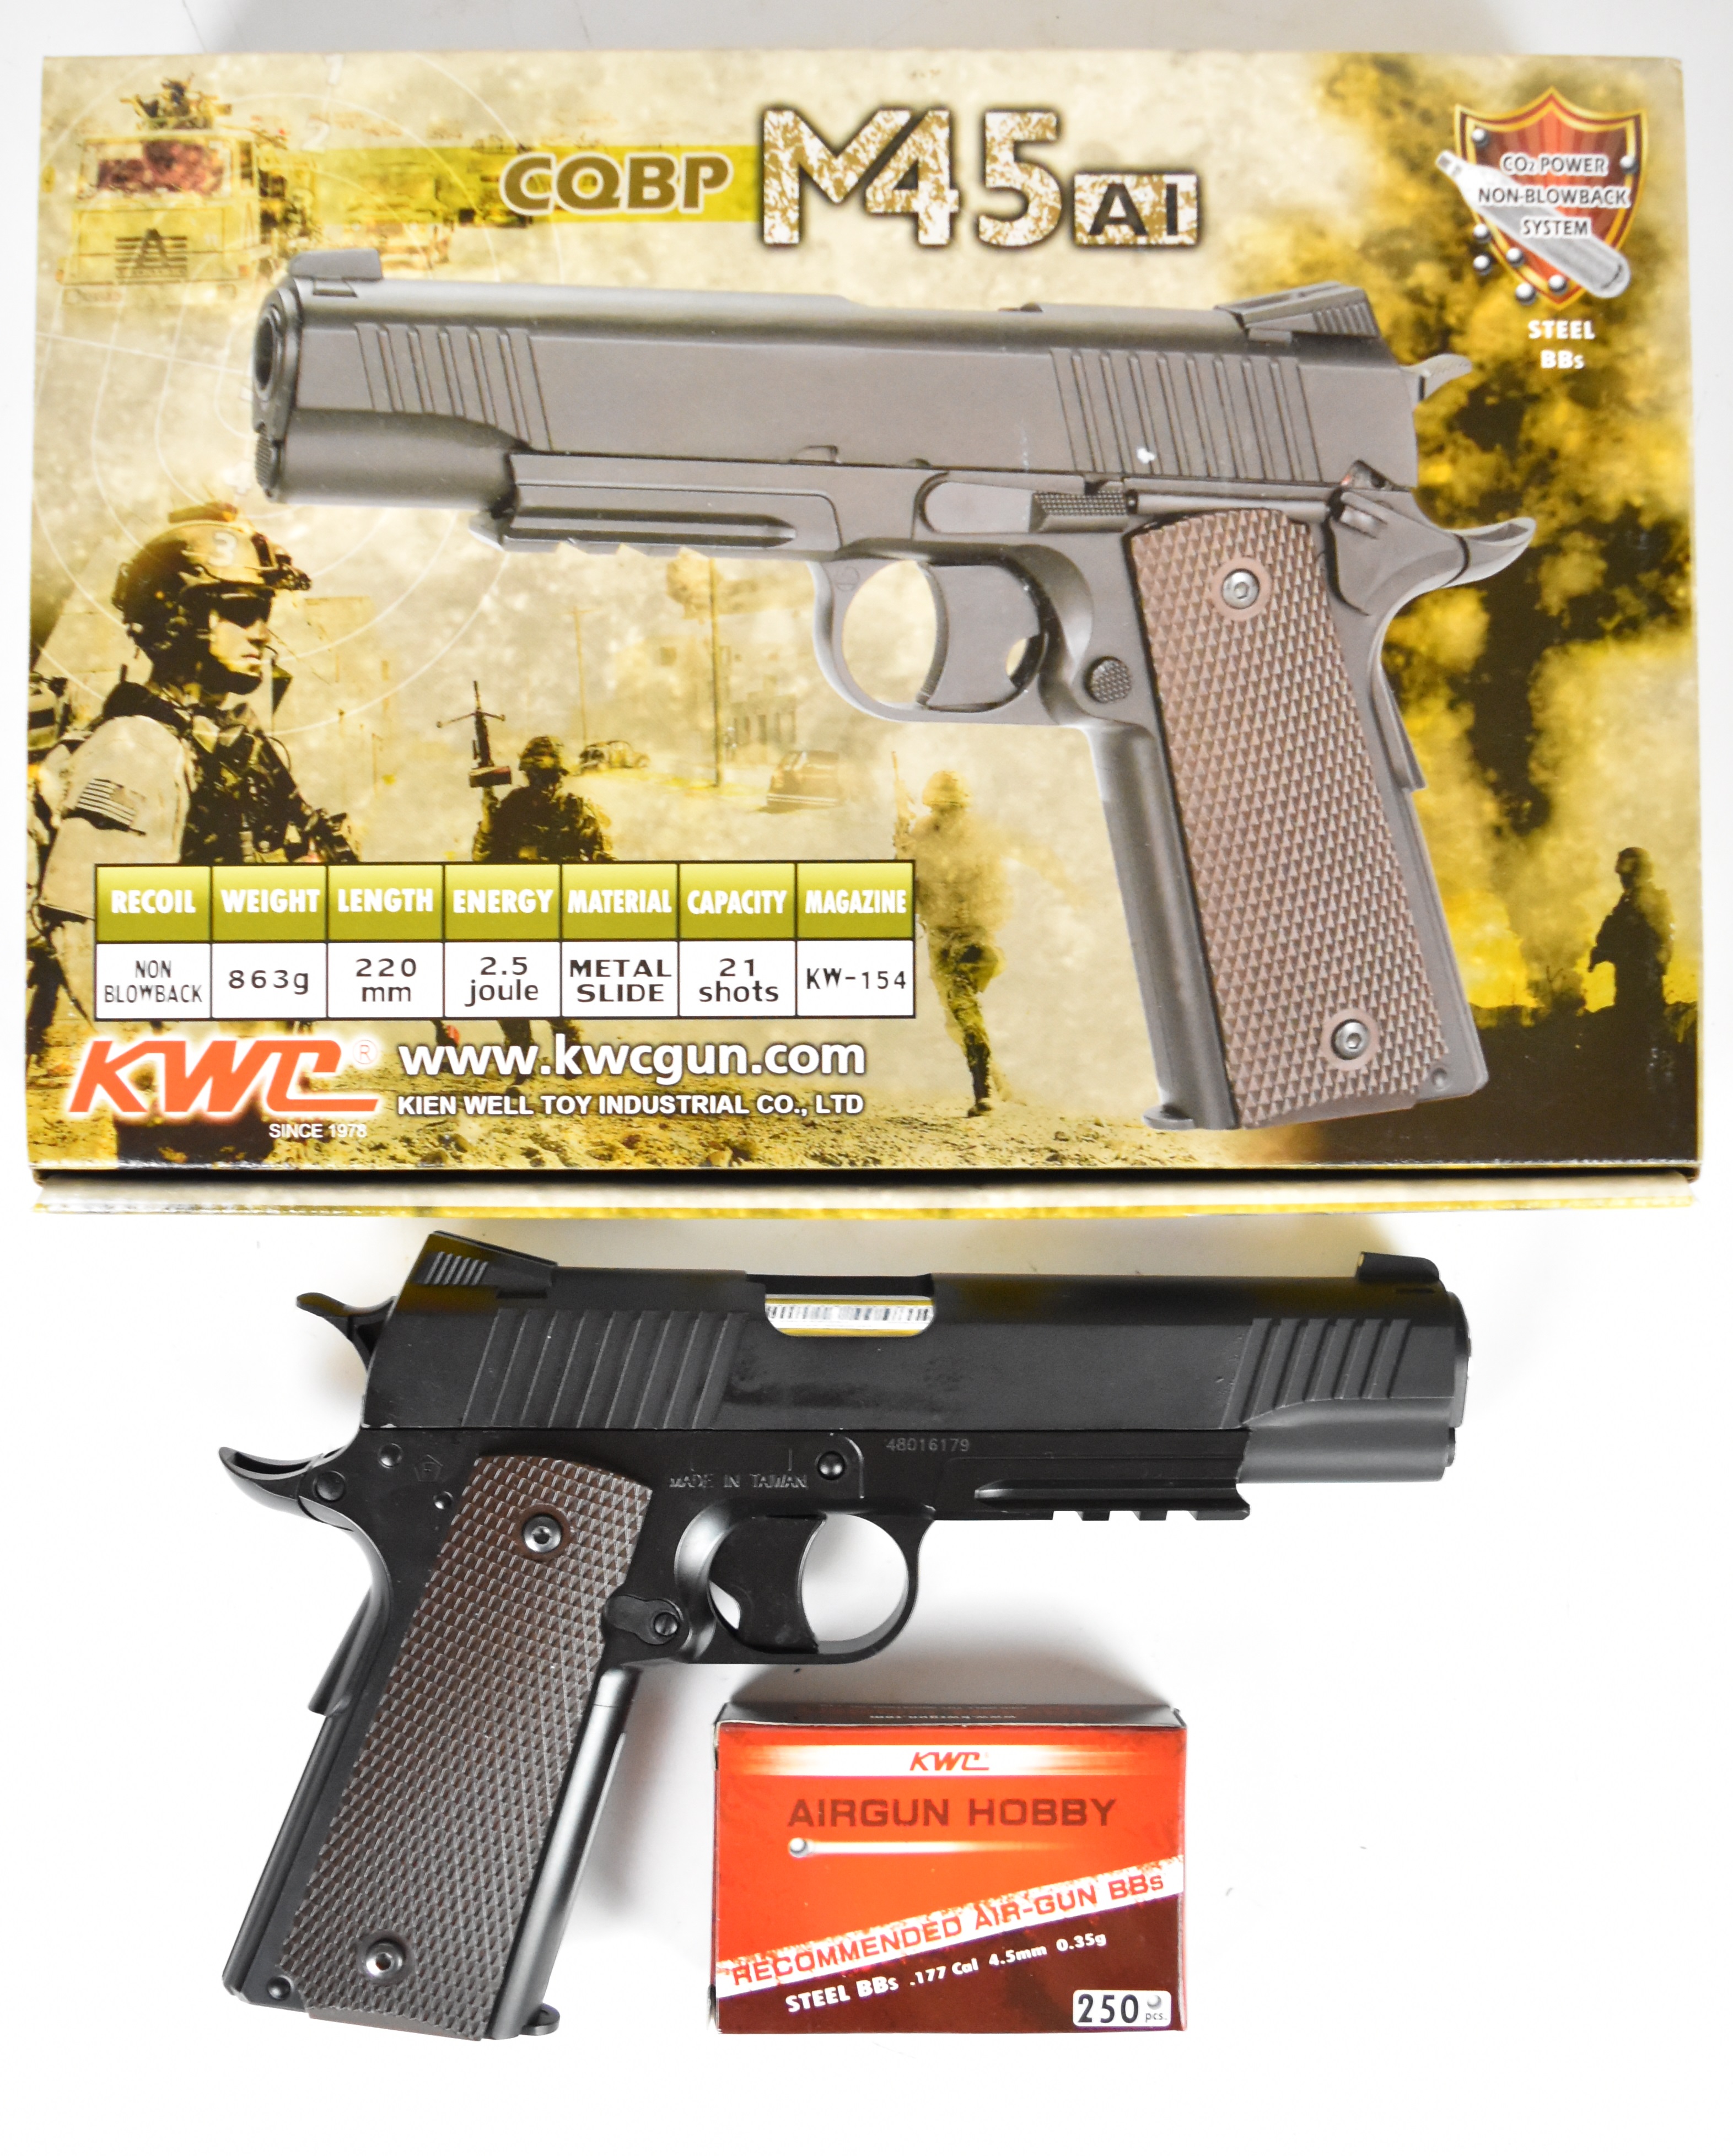 KWC M45 A1 .177 CO2 air pistol with chequered grips and 21 shot magazine, serial number 48016179, in